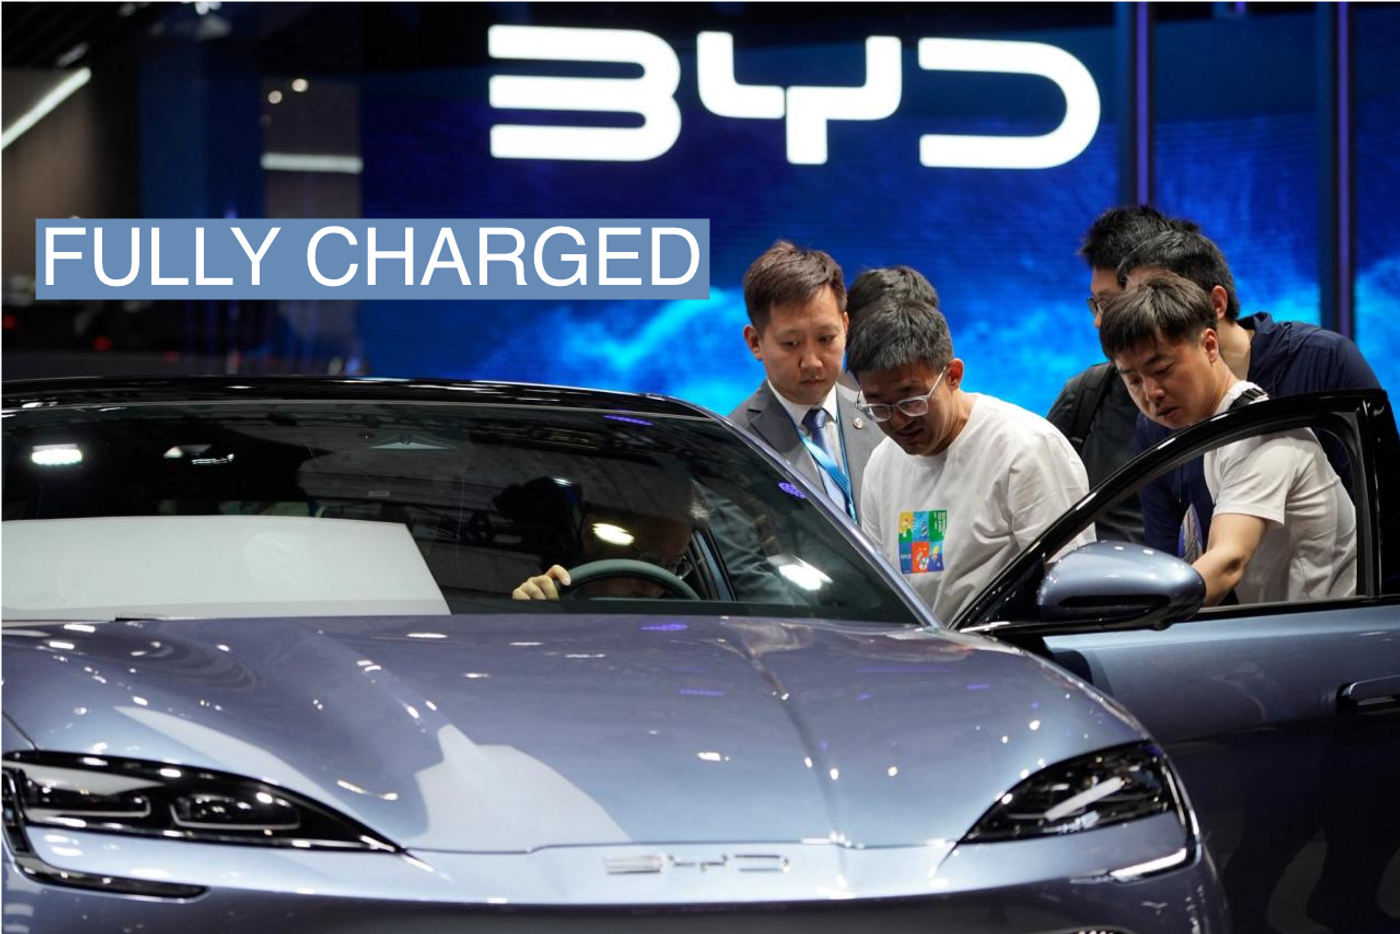 Attendees of the Shanghai Auto Show look at the specs of a BYD electric vehicle.